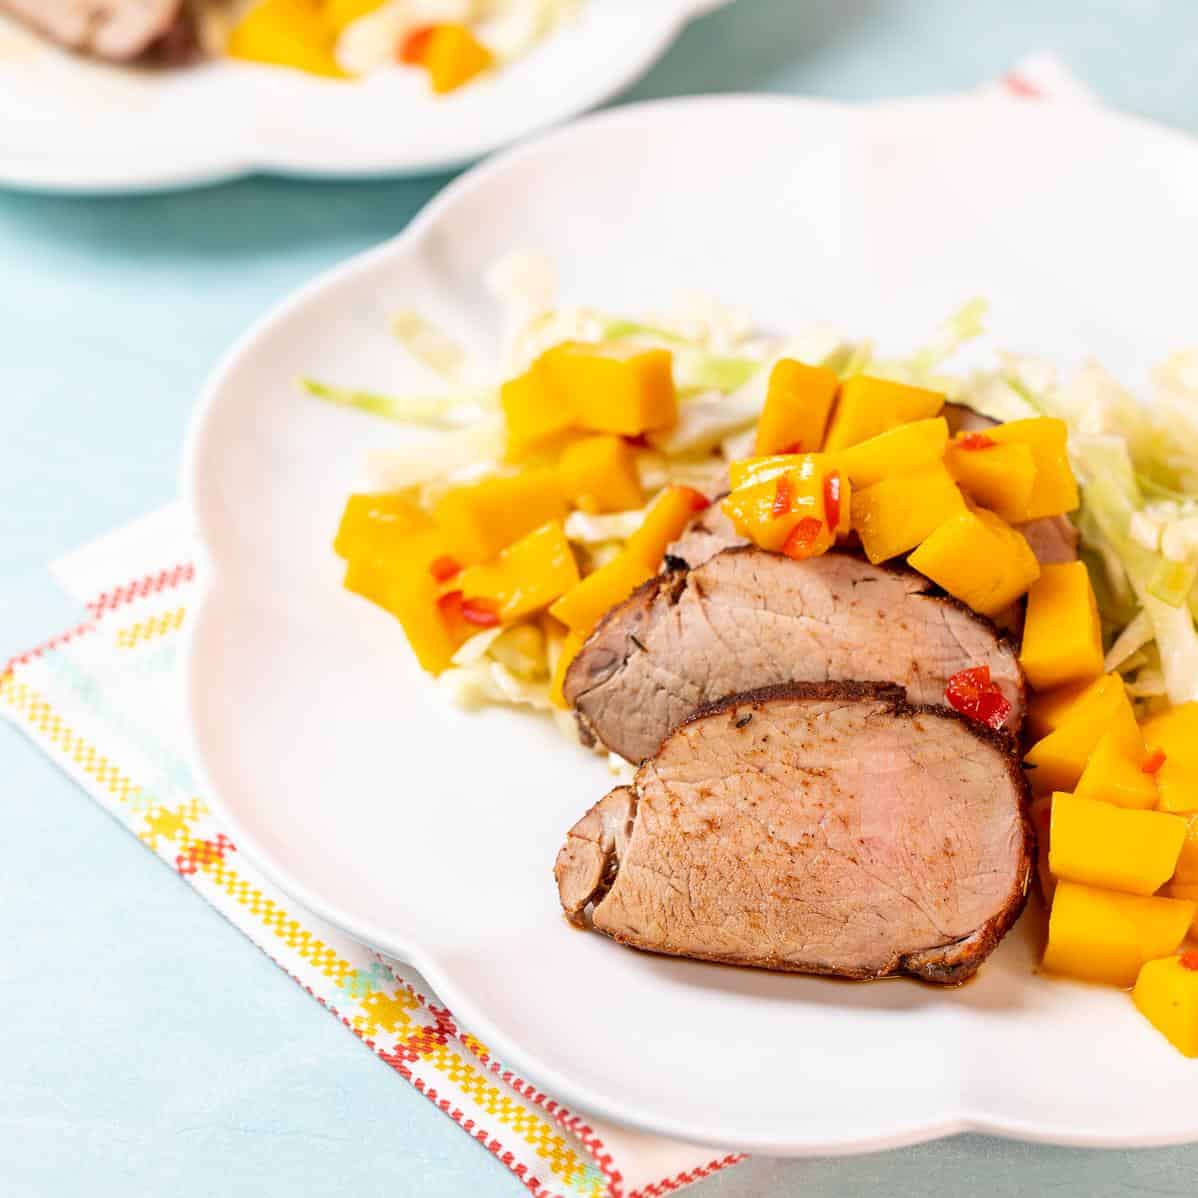  Brighten up your dinner table with these luscious pork medallions adorned with cubes of ripe mango.